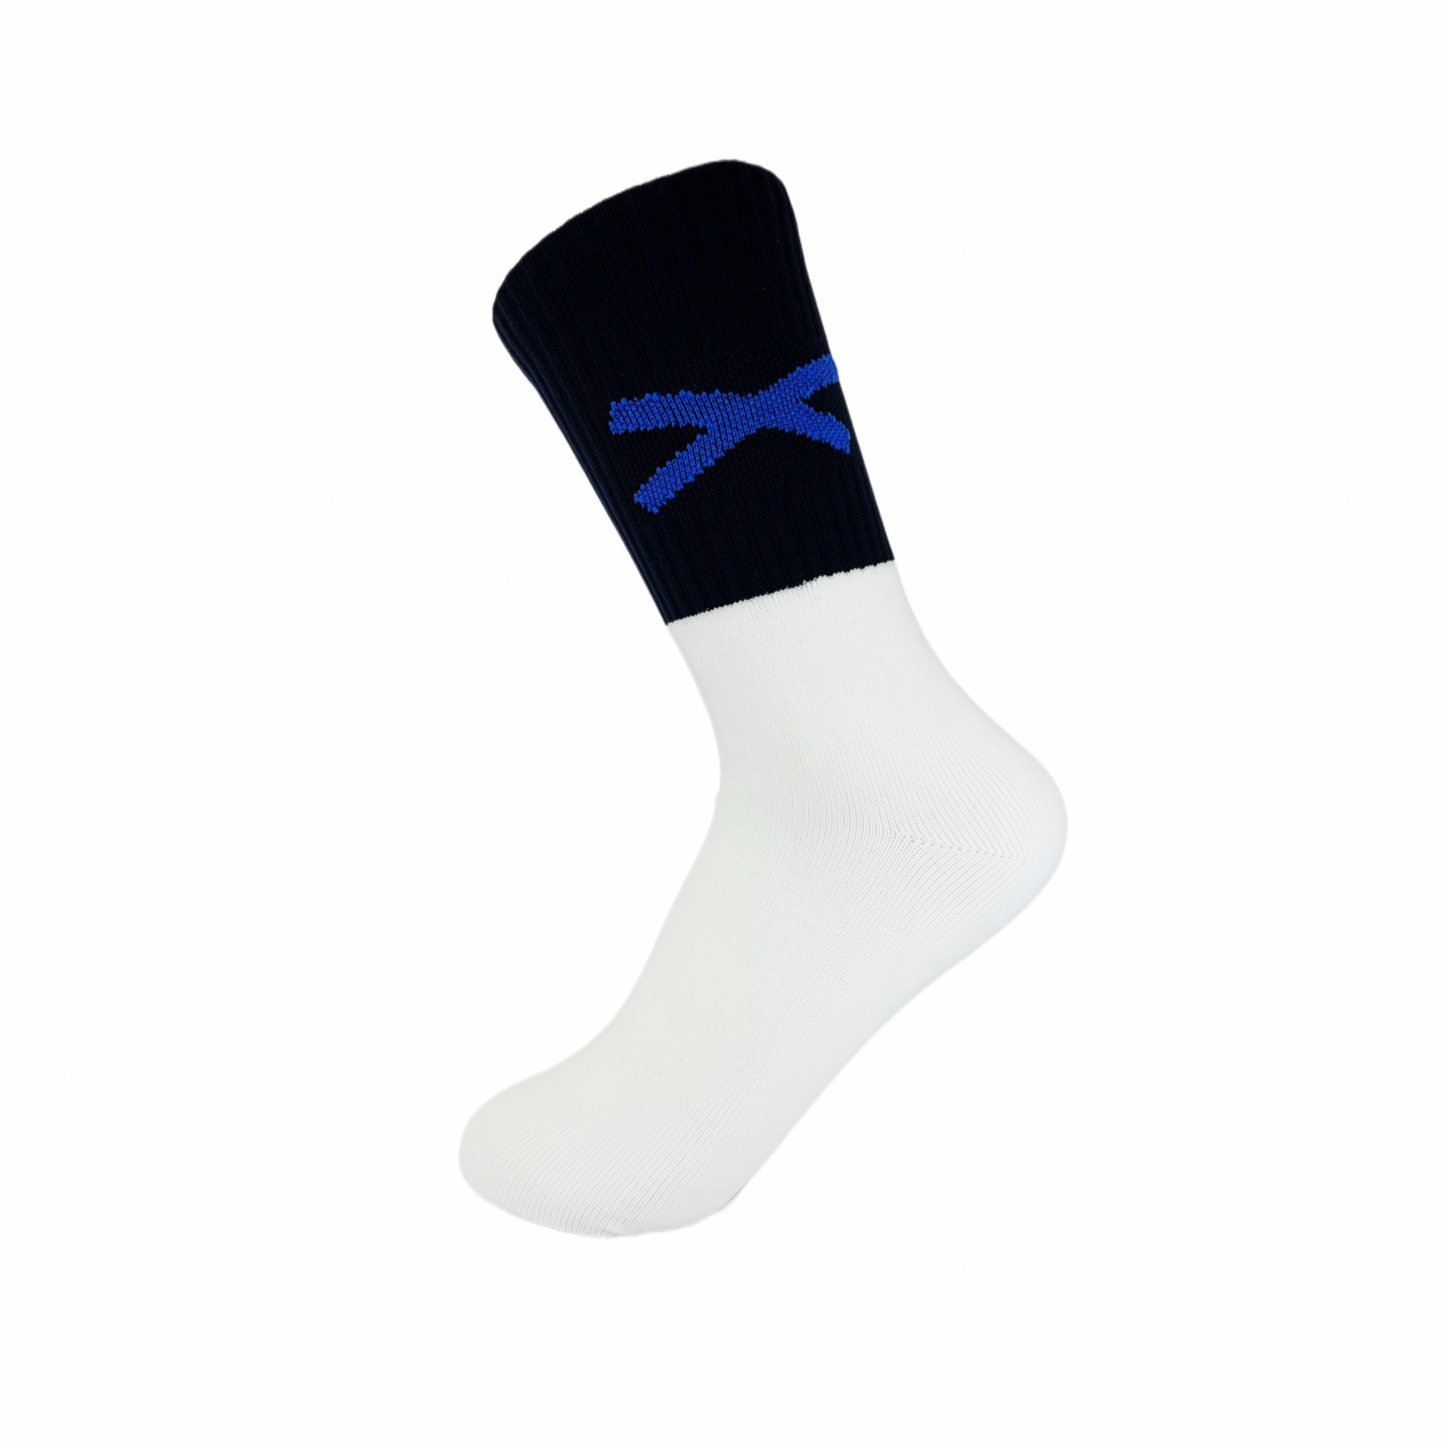 New and Improved X Gaelic Games Sock ( Black and Blue)